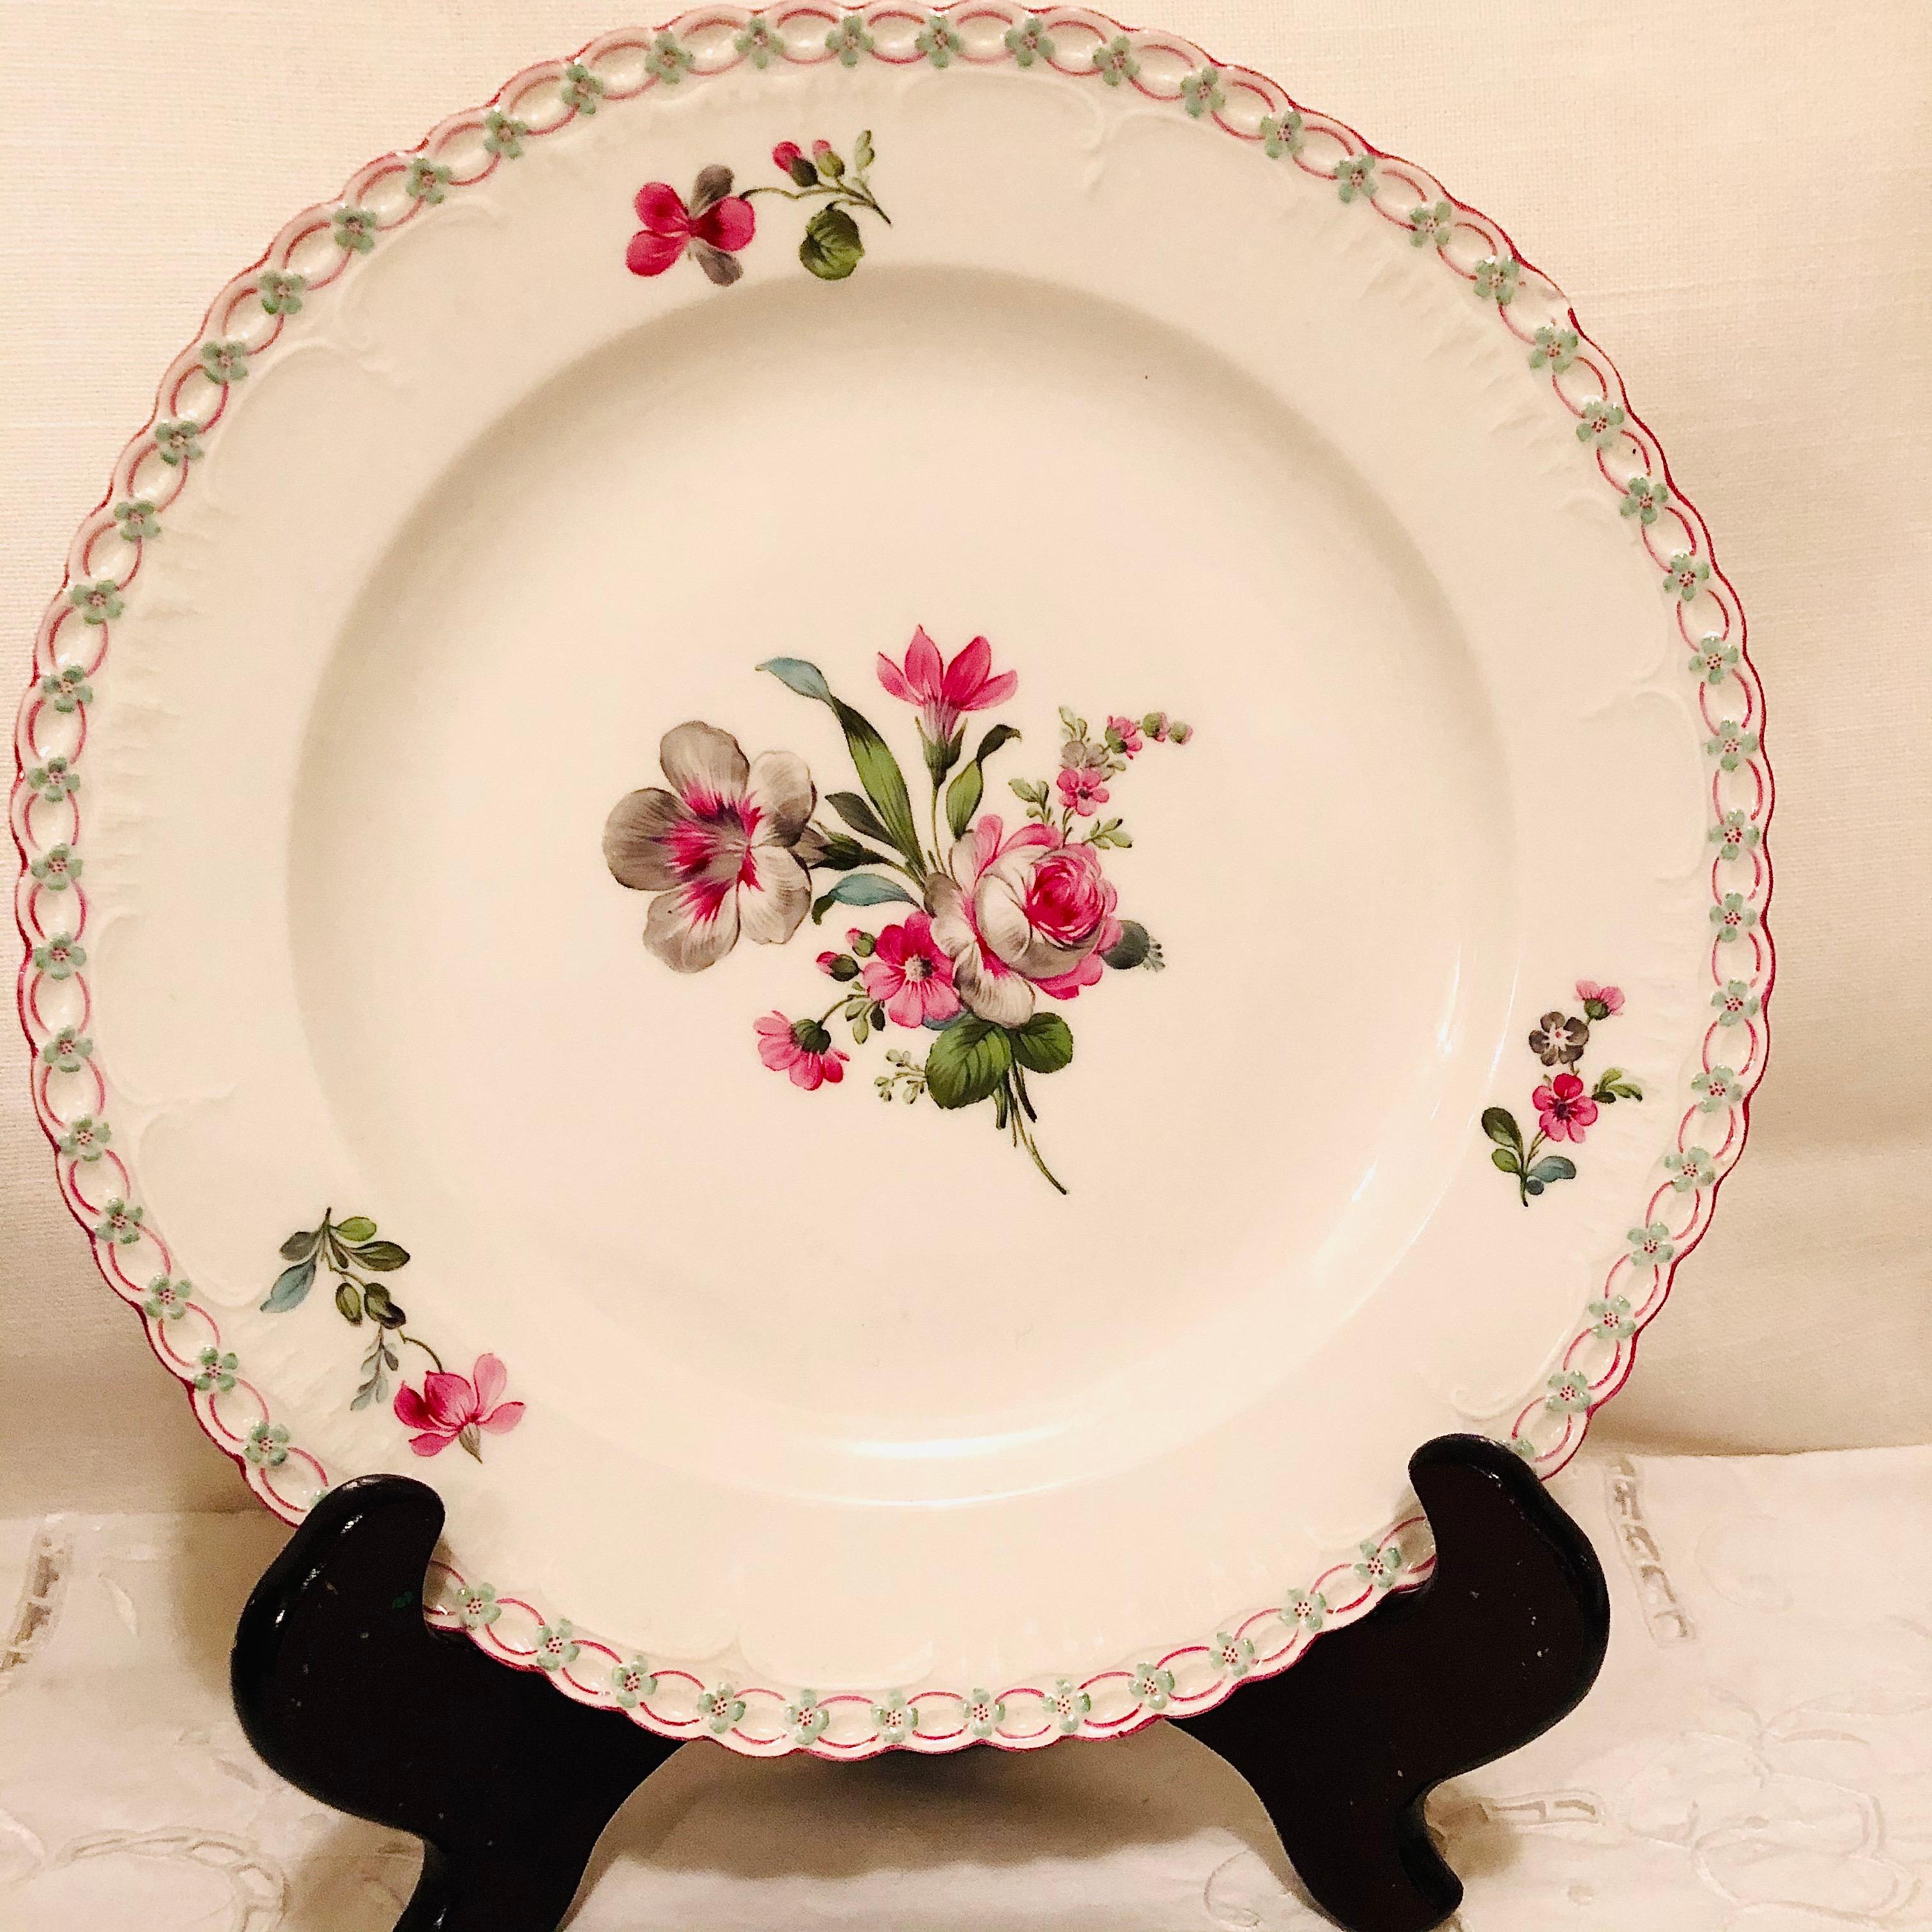 Set of 13 KPM Dinner Plates Each Painted Differently With Raised Forget Me Nots 4